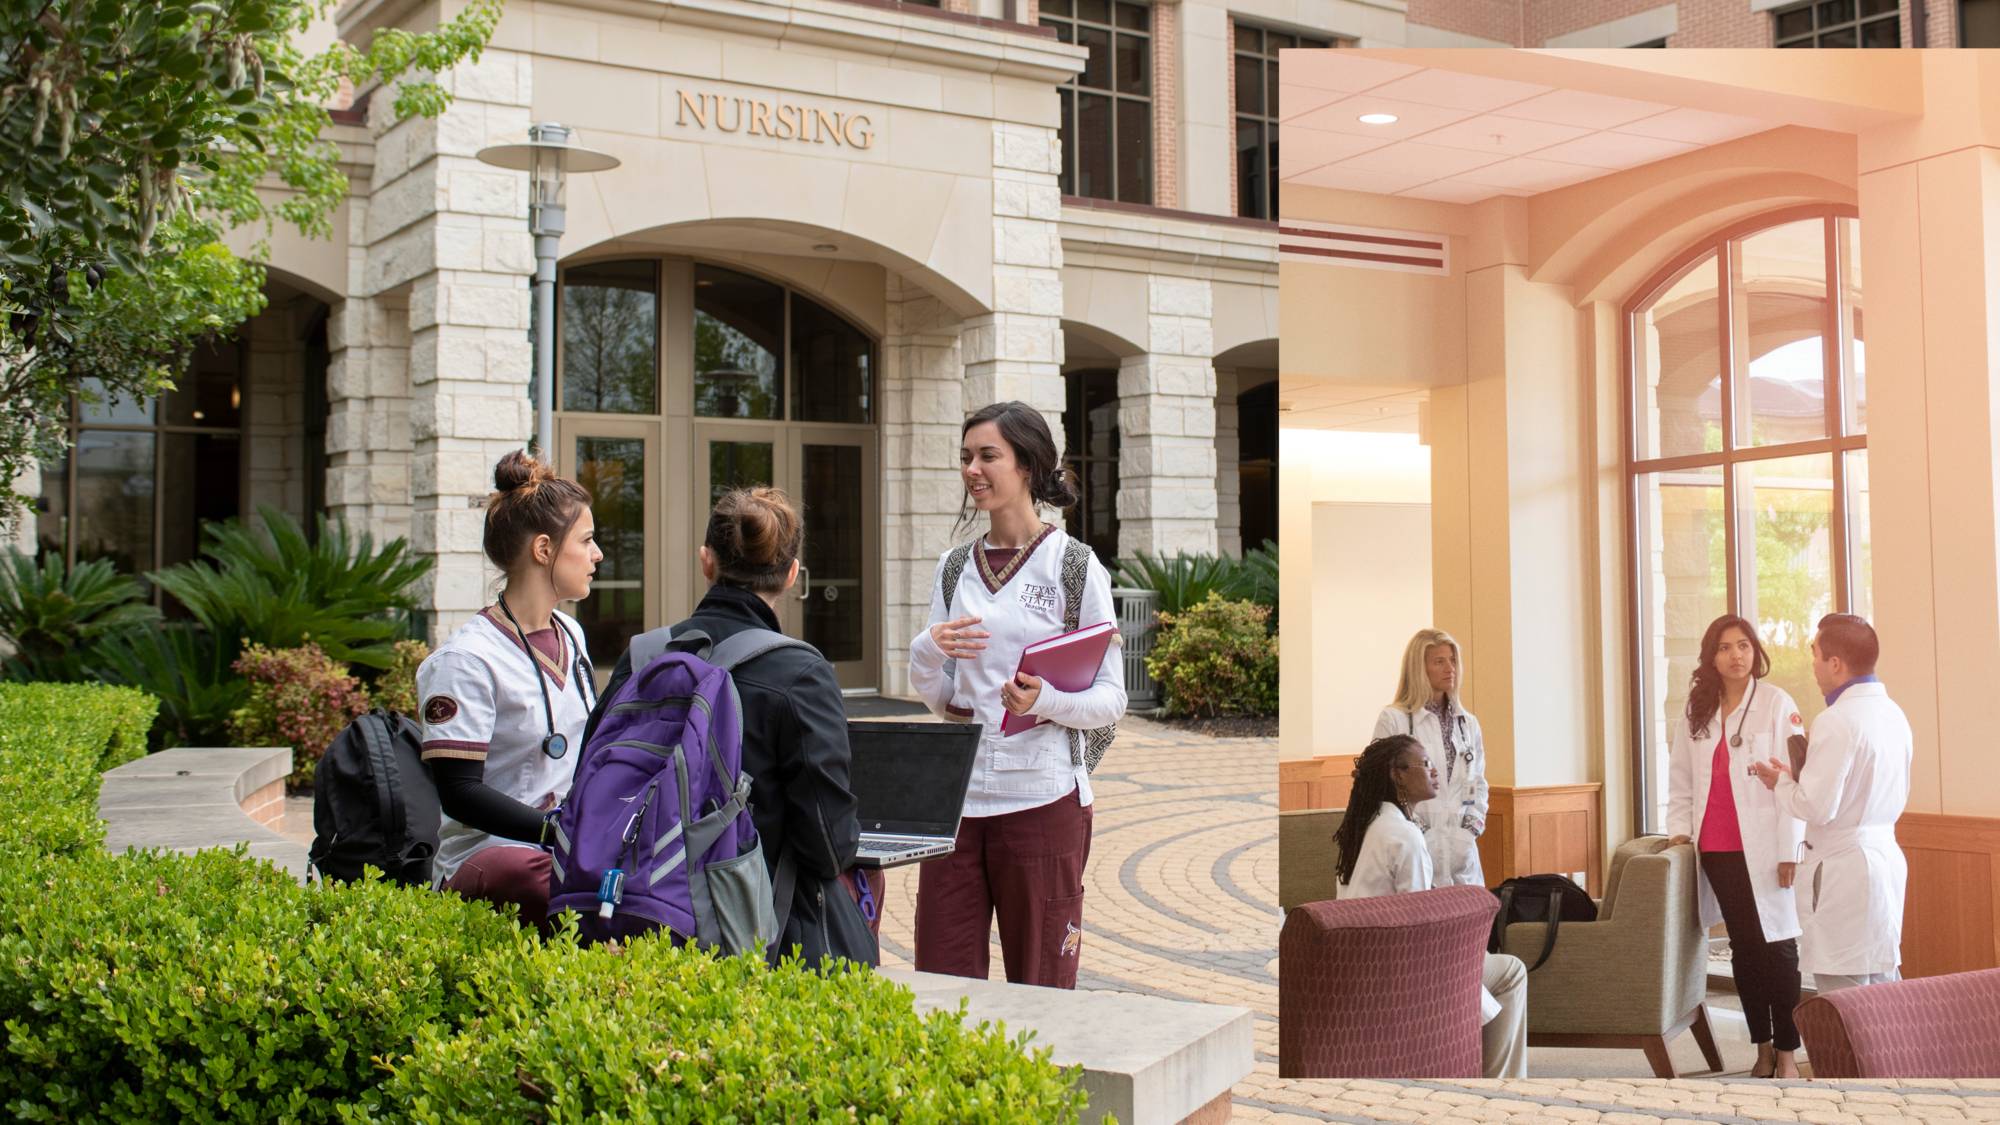 Photos of nursing students at the Round Rock Campus collaged together